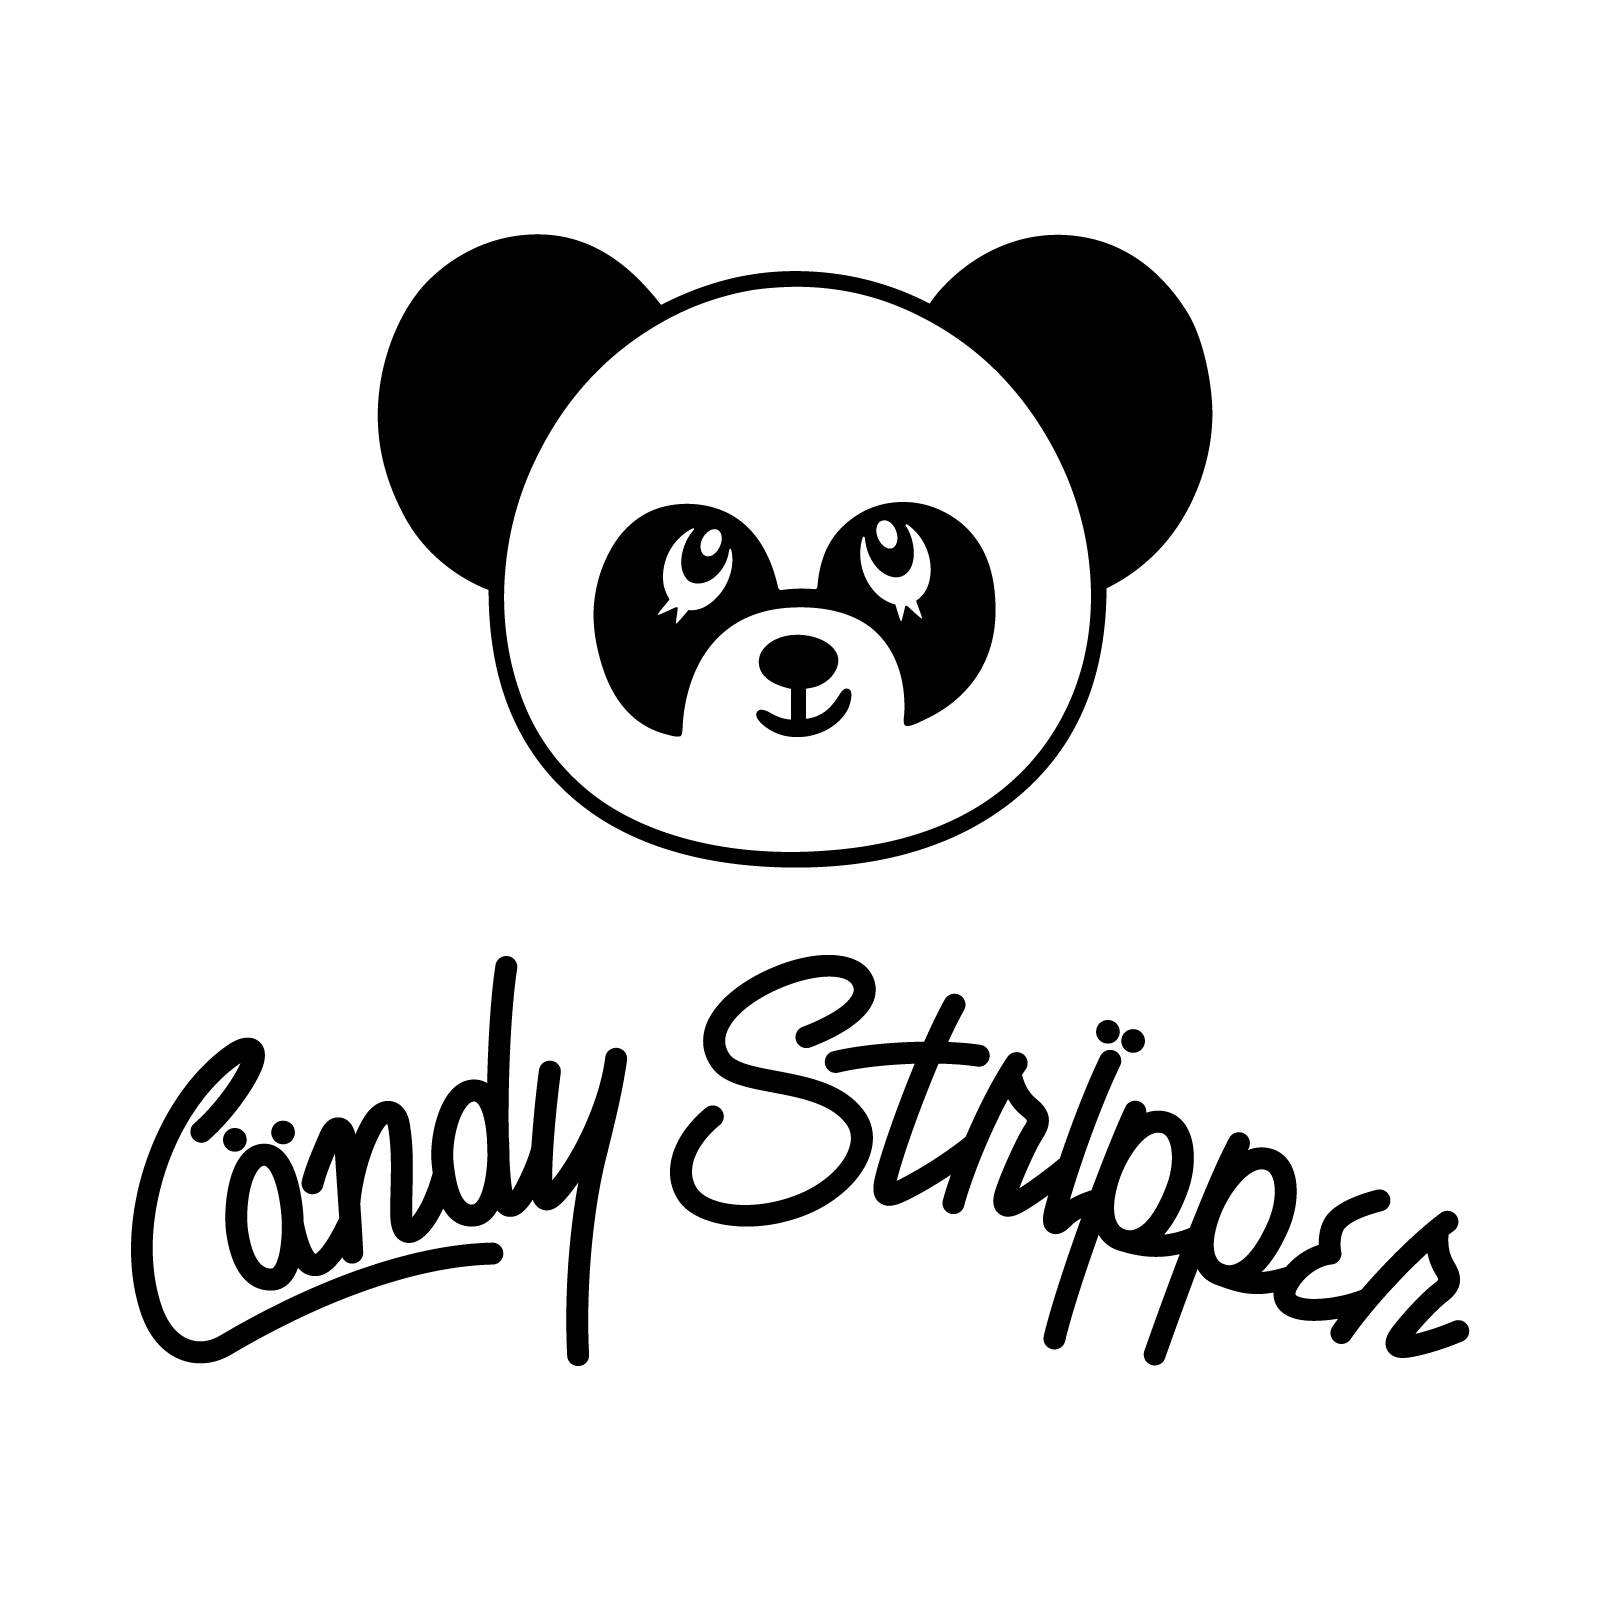 CANDY STRIPPERCOLLECTIONS / CANDY STRIPPER